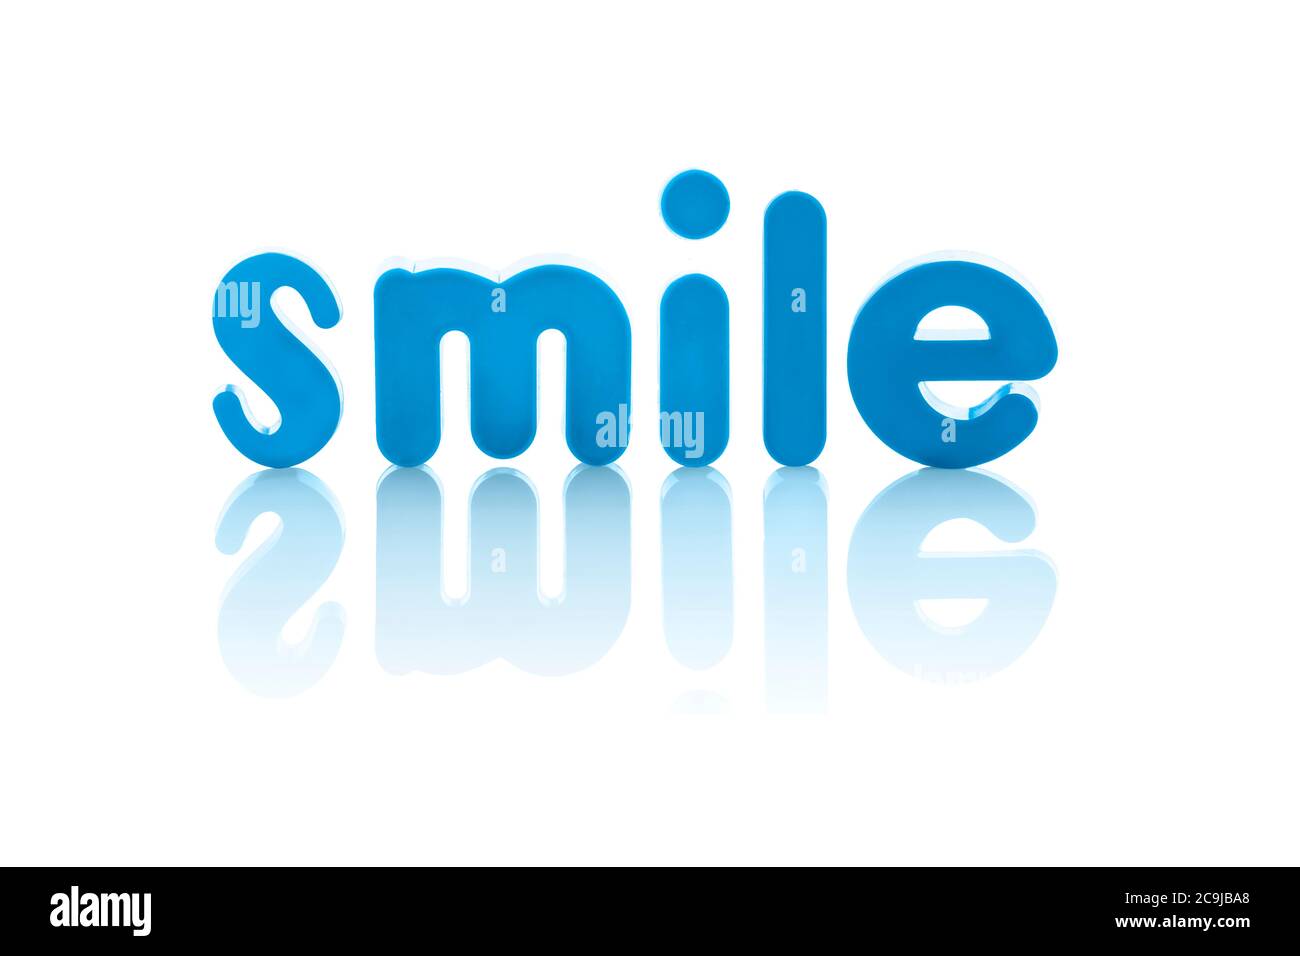 The word 'smile' in blue letters against a white background. Stock Photo